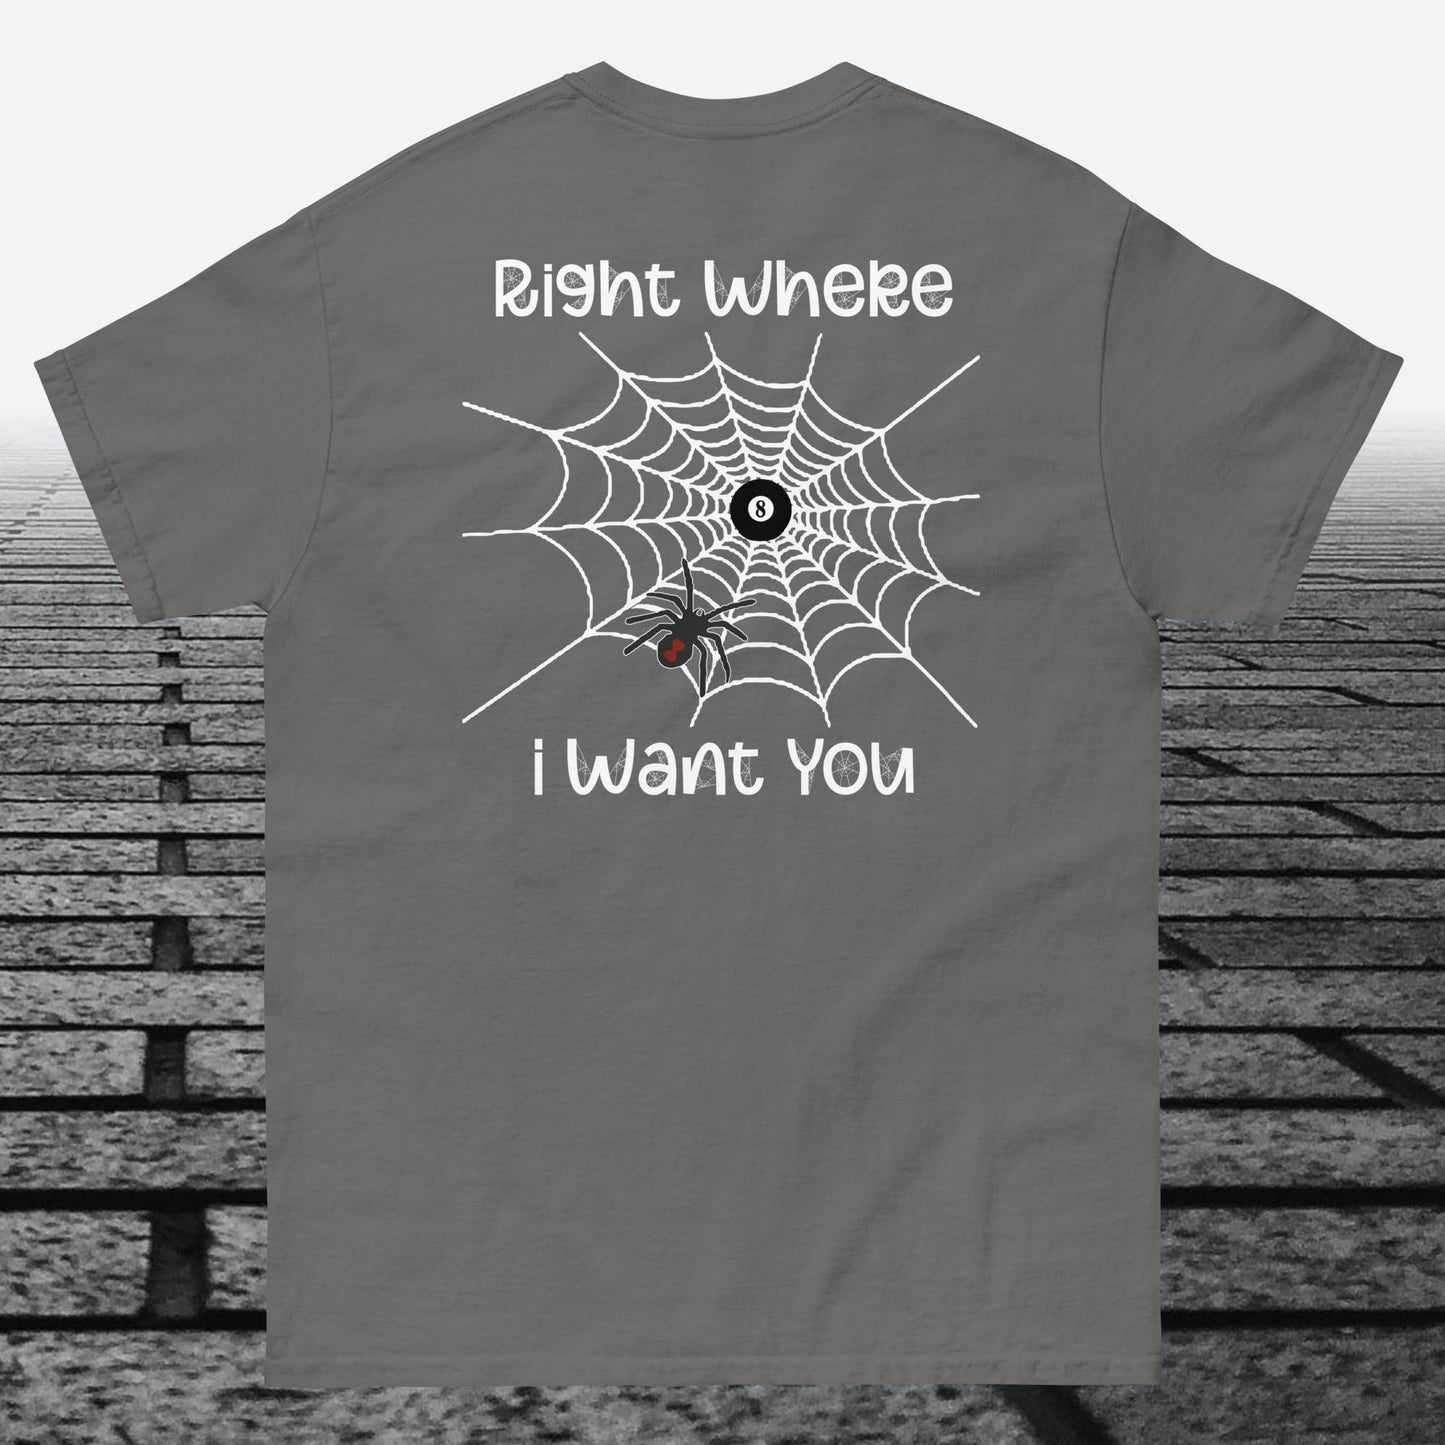 Right Where I Want You with white web, logo on the front, Cotton t-shirt